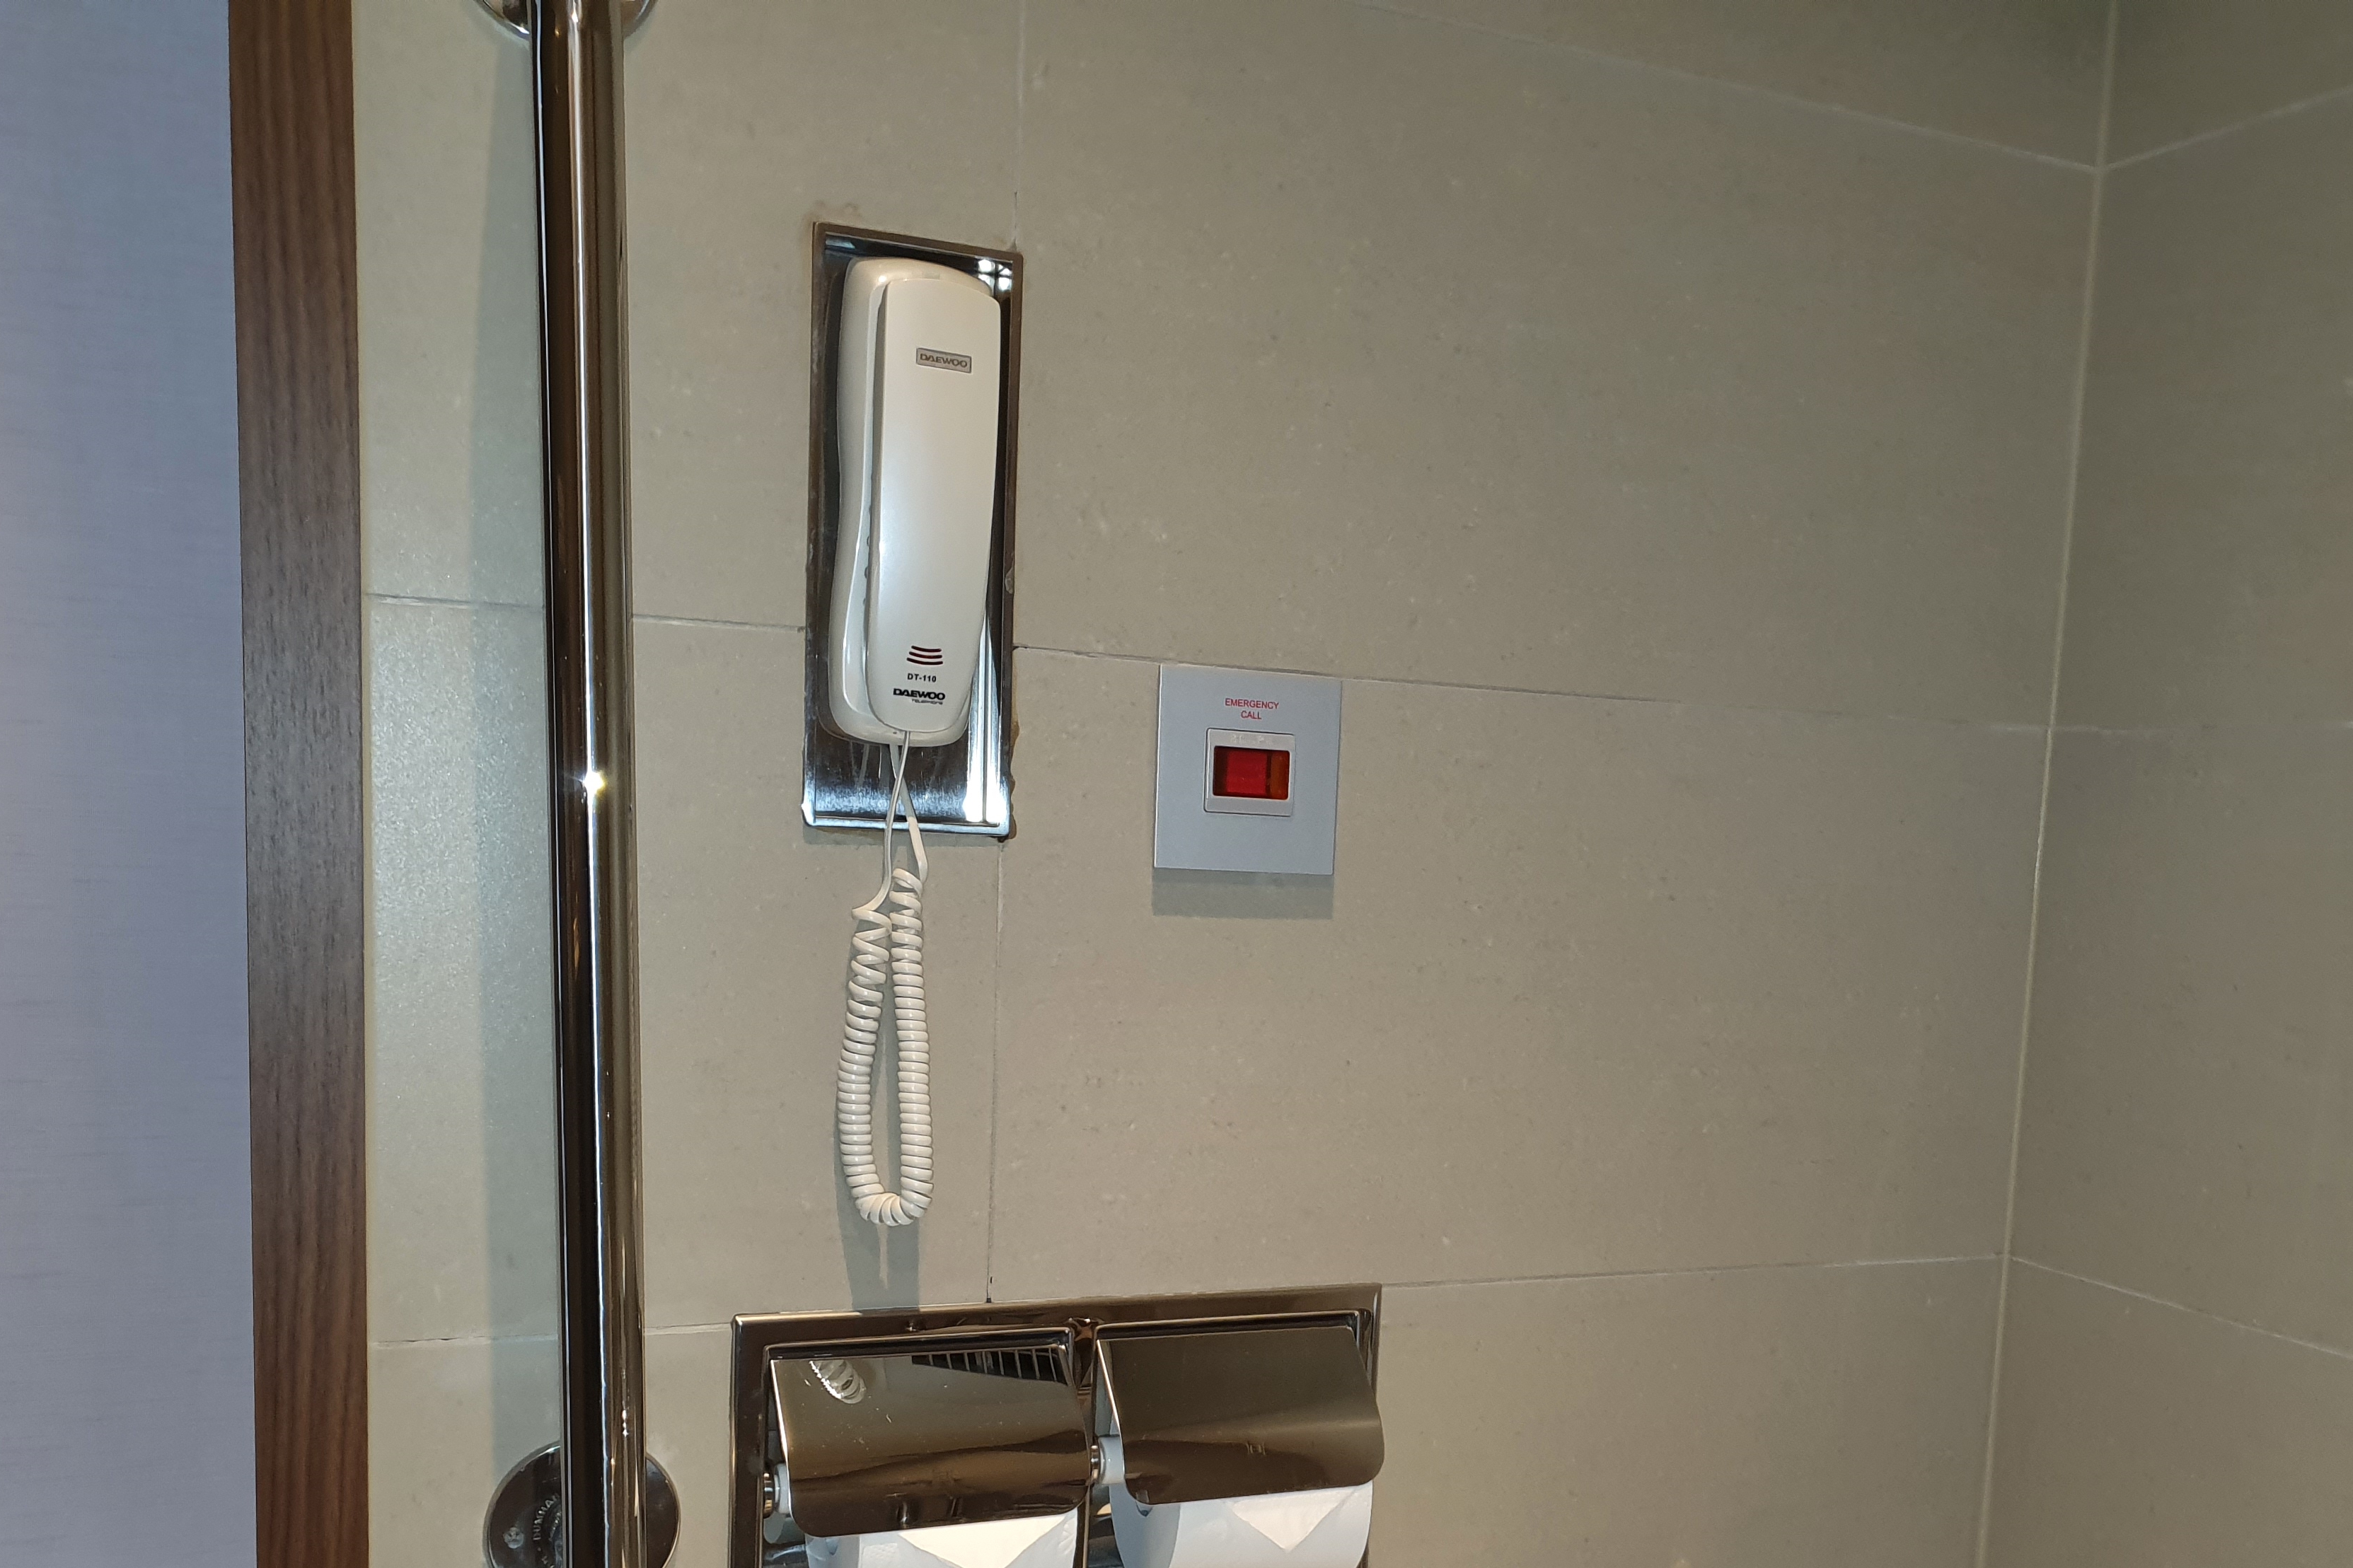 Roll-in shower in the guest room0 : An emergency bell in the bathroom